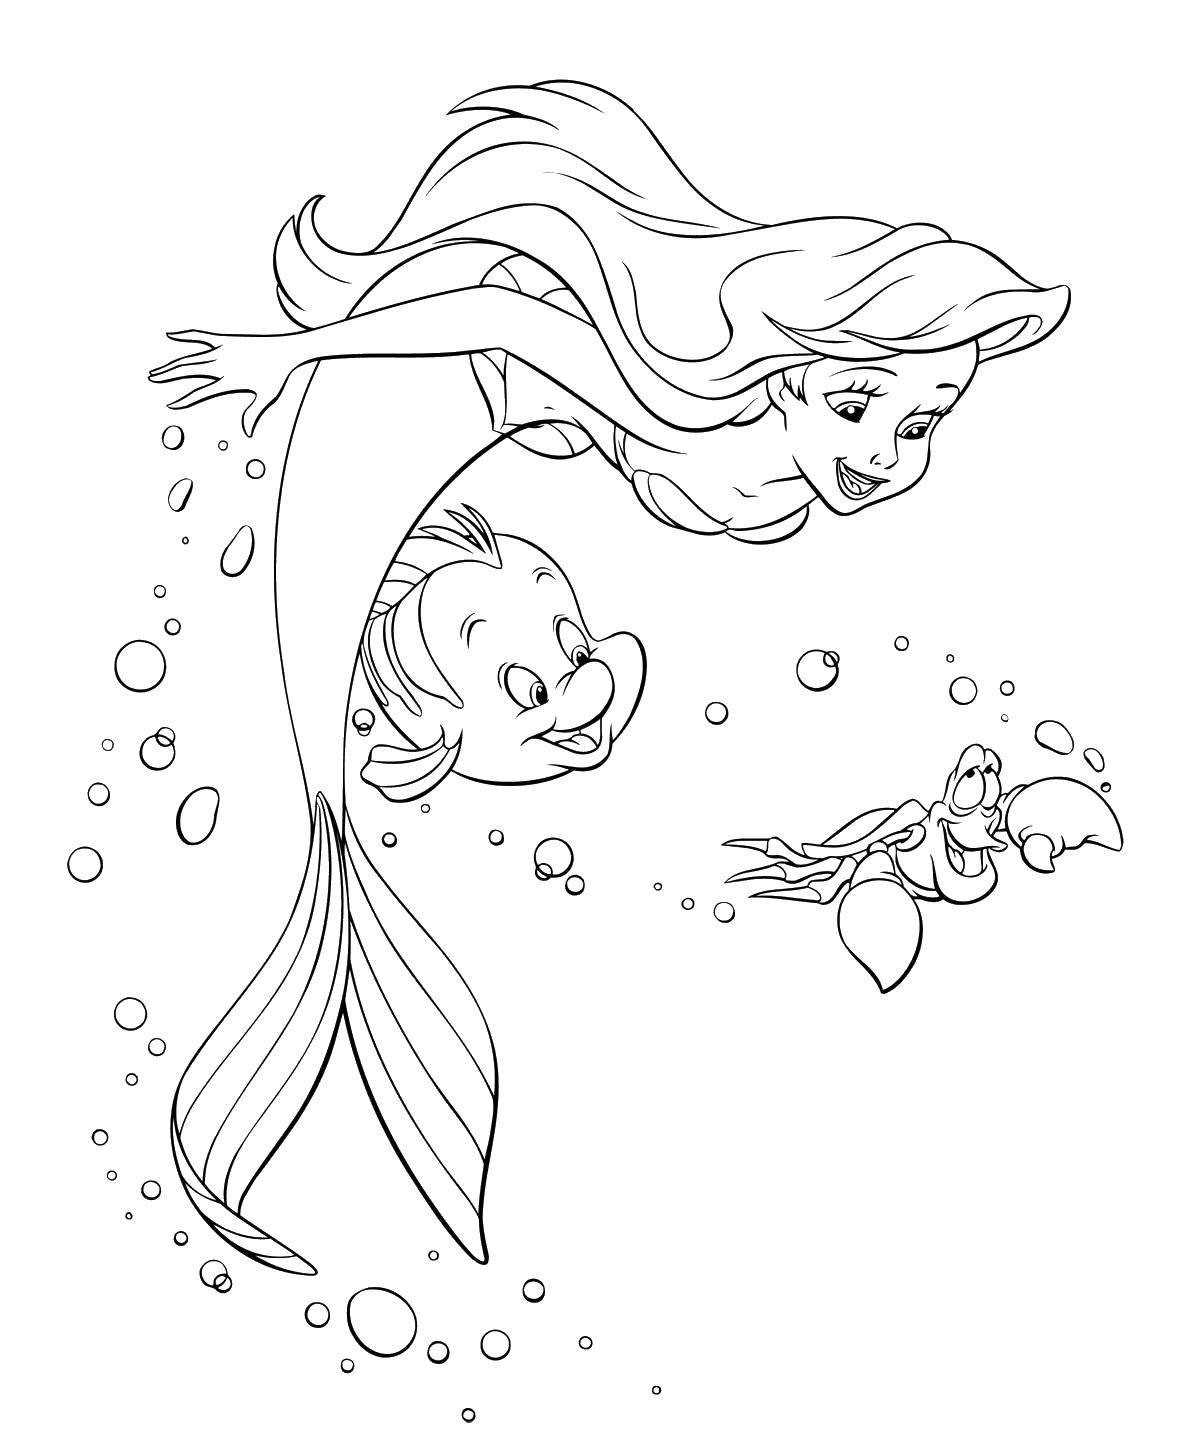 Coloring Ariel swims with friends. Category the little mermaid. Tags:  Disney, the little mermaid, Ariel.